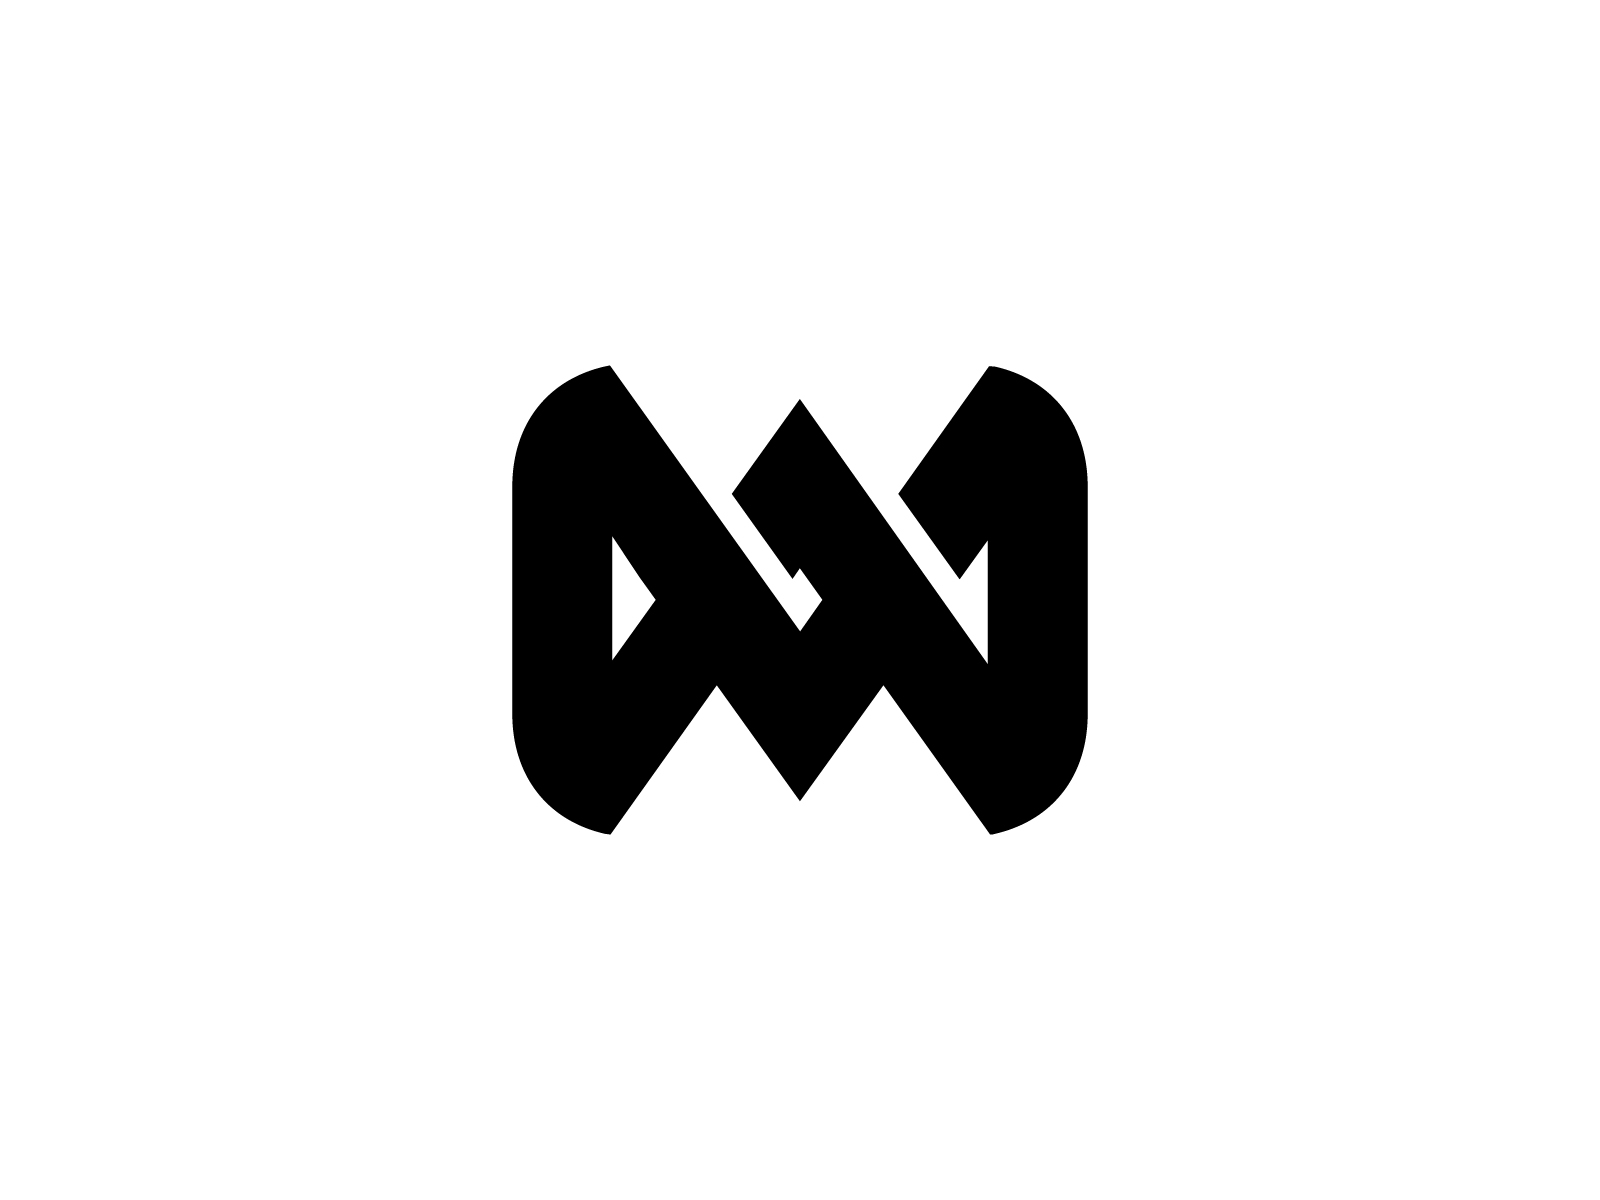 WM monogram | Brands of the World™ | Download vector logos and logotypes